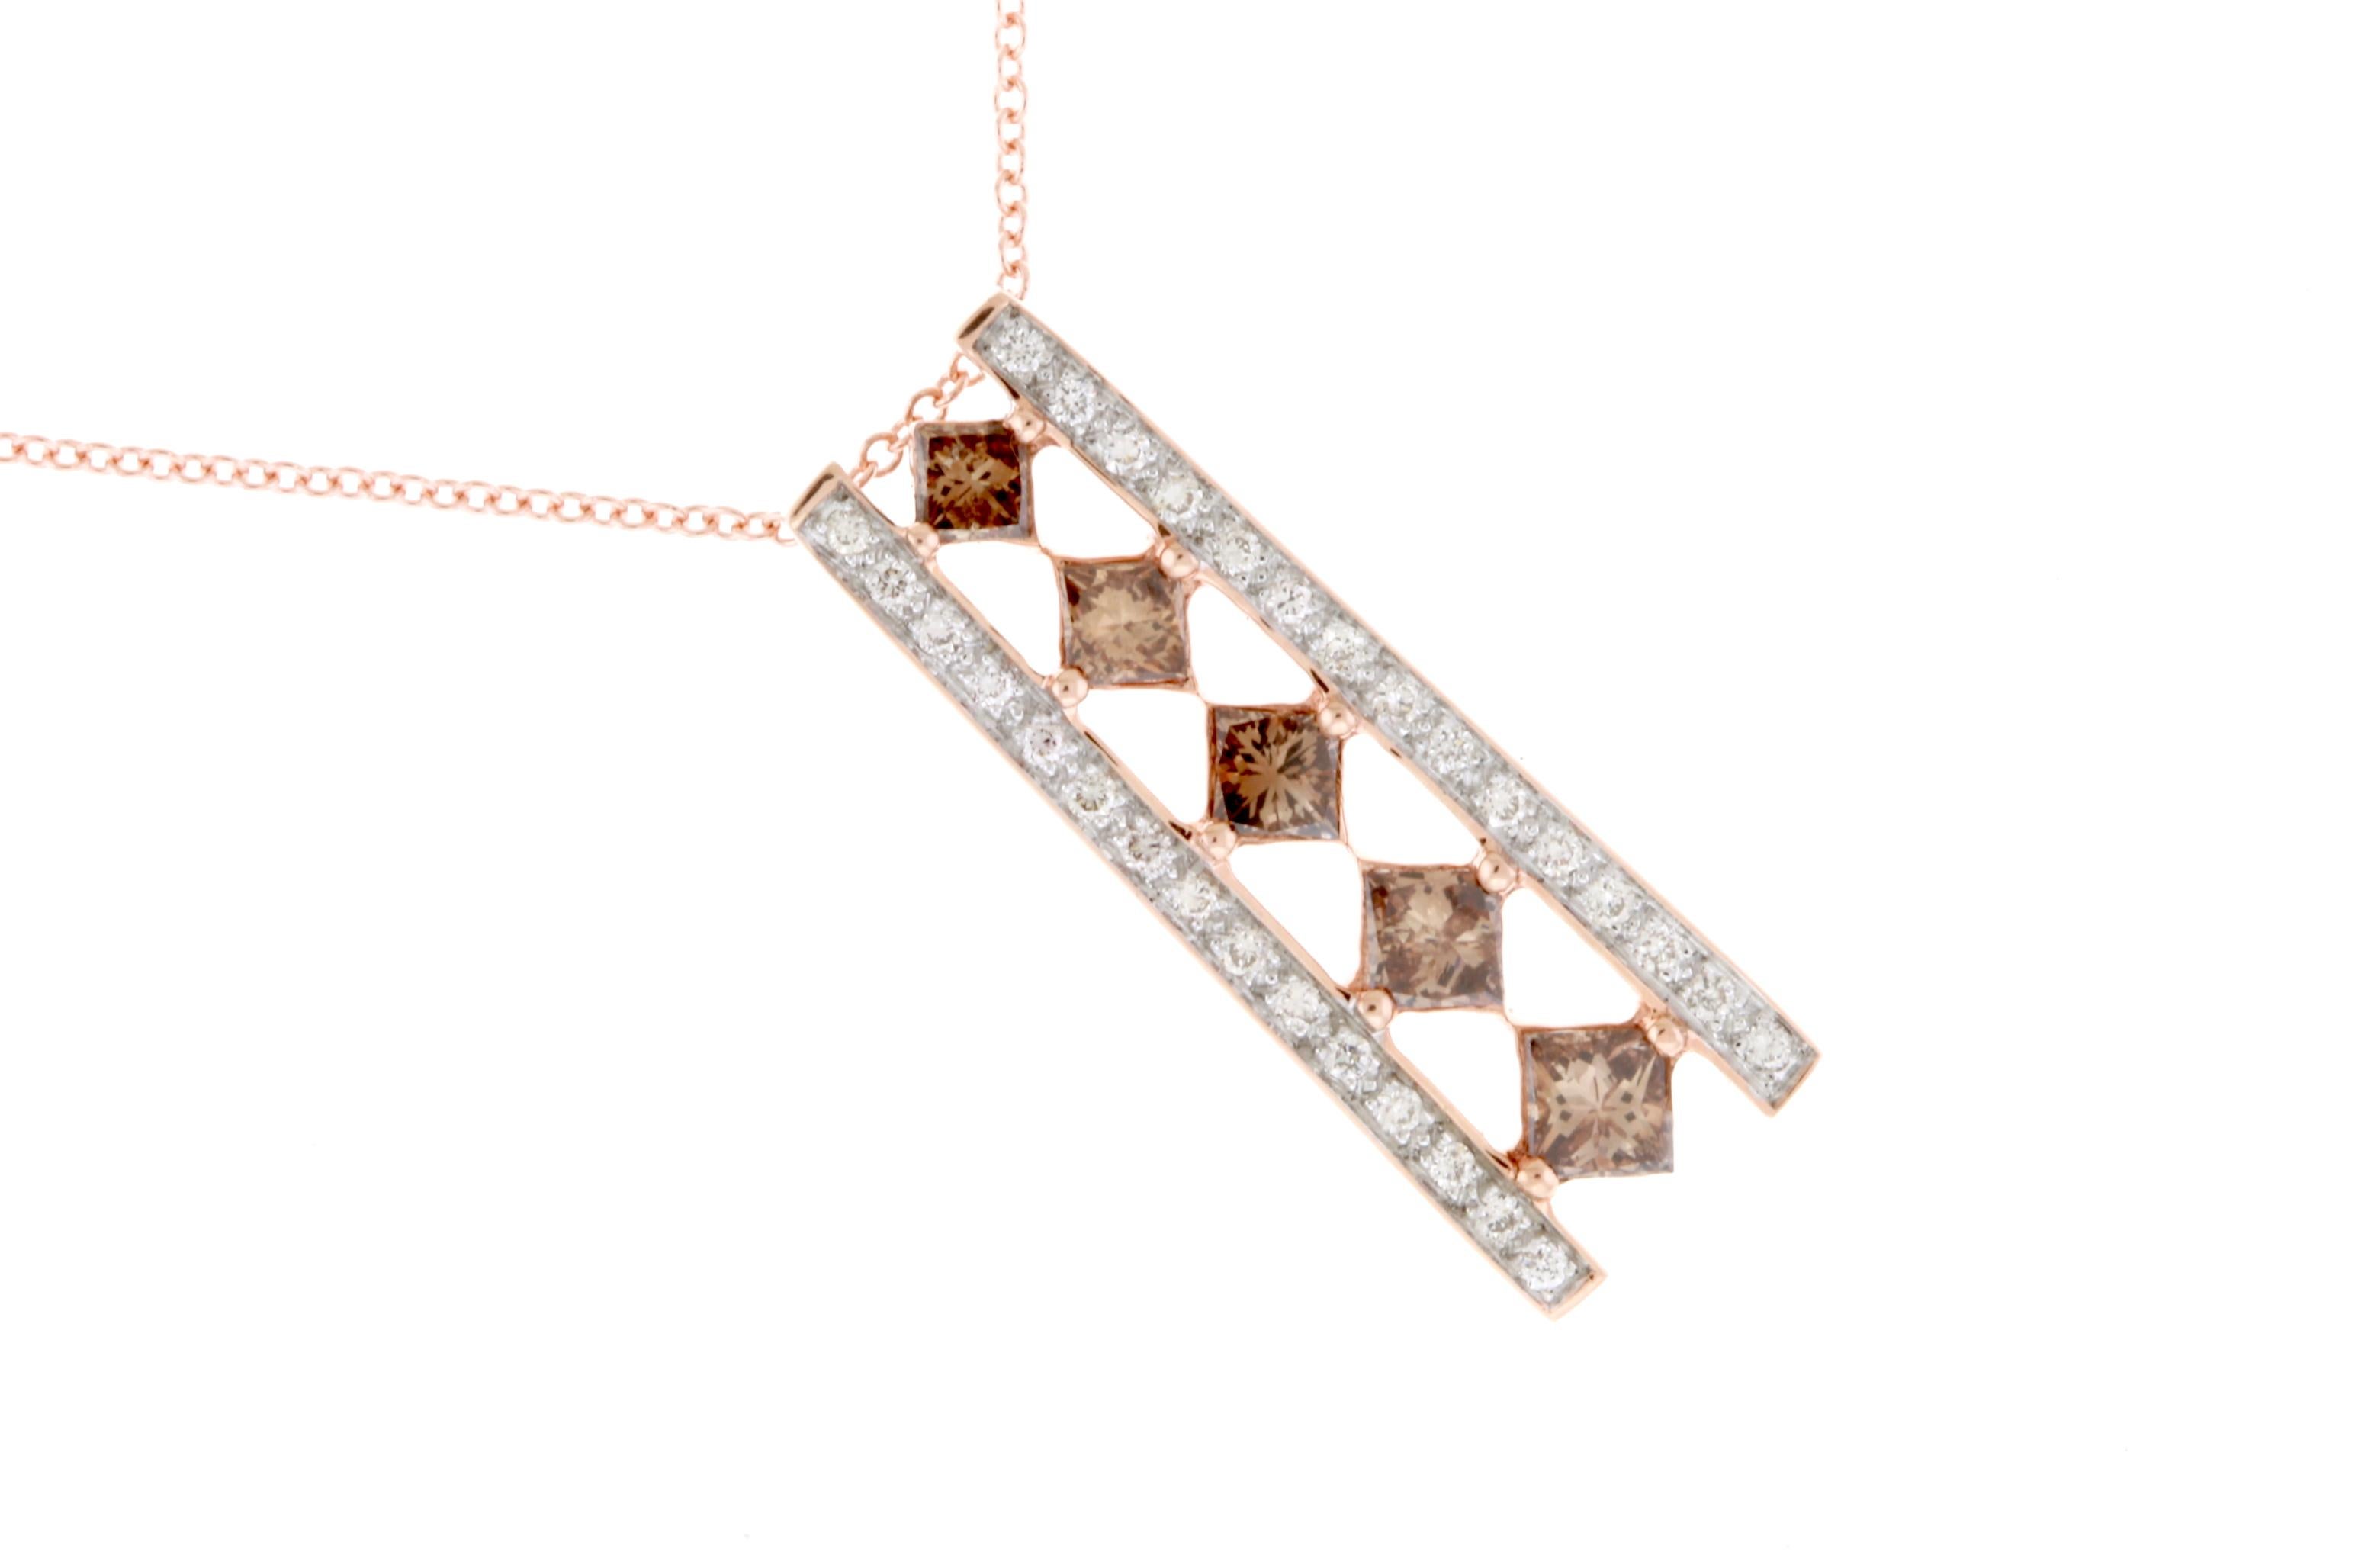 A truly elegant piece, this pendant features 5 Princess cut Natural Cognac Color Diamonds descending down the center. Diamonds align either side of the stones giving it that extra sparkle and wow factor!

Material: 14k Rose Gold 
Center Diamond